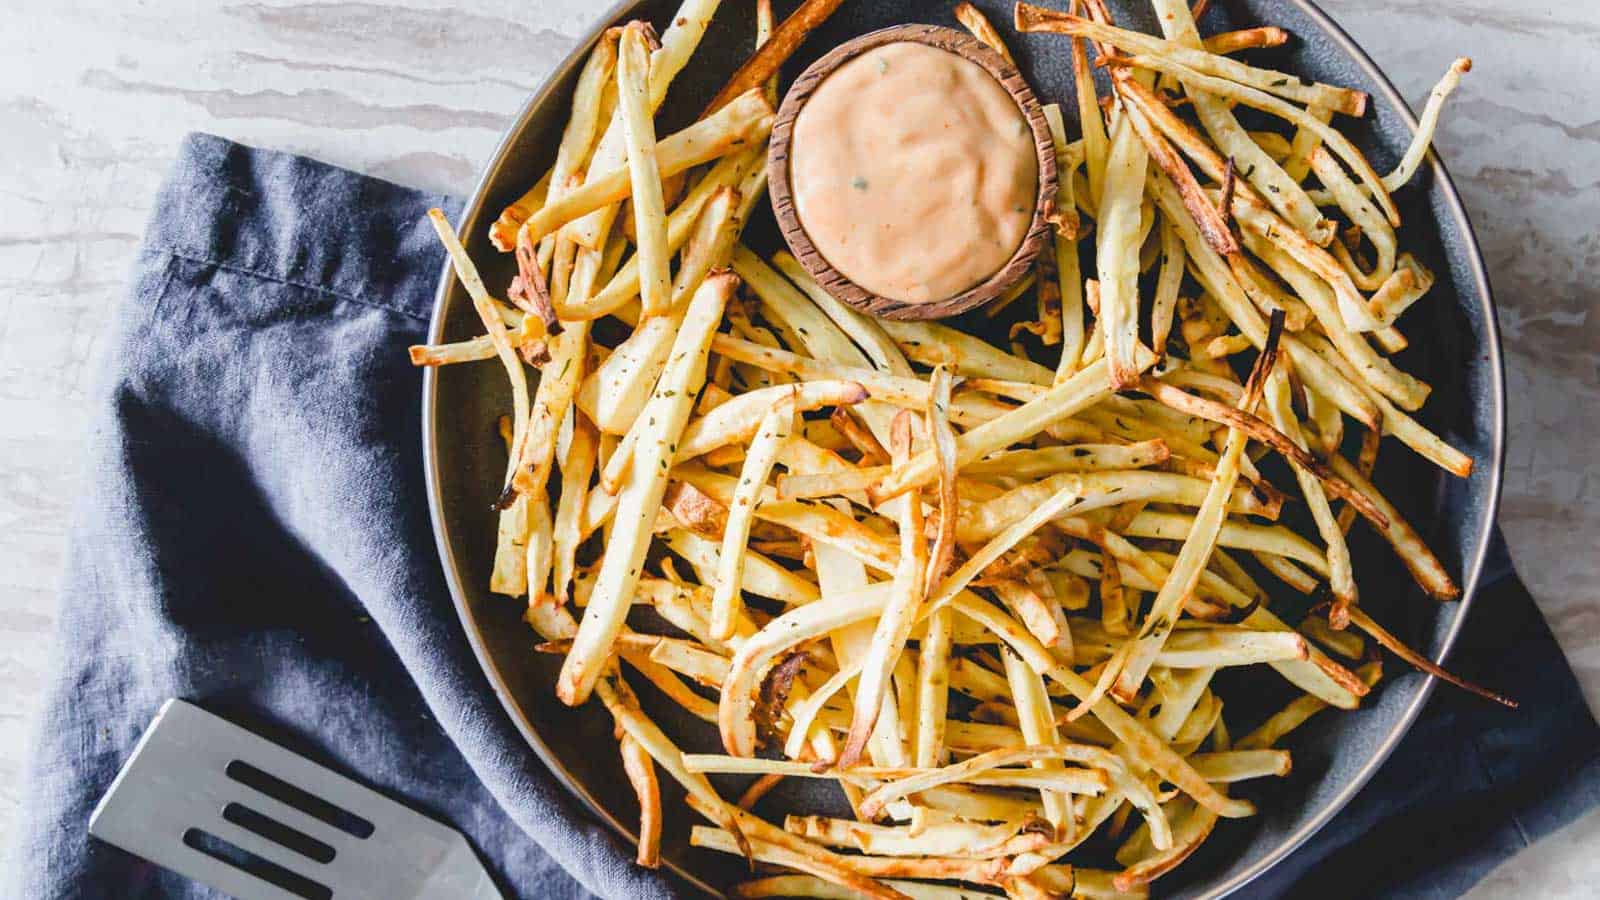 Parsnip fries on a plate with dipping sauce on a blue kitchen towel.